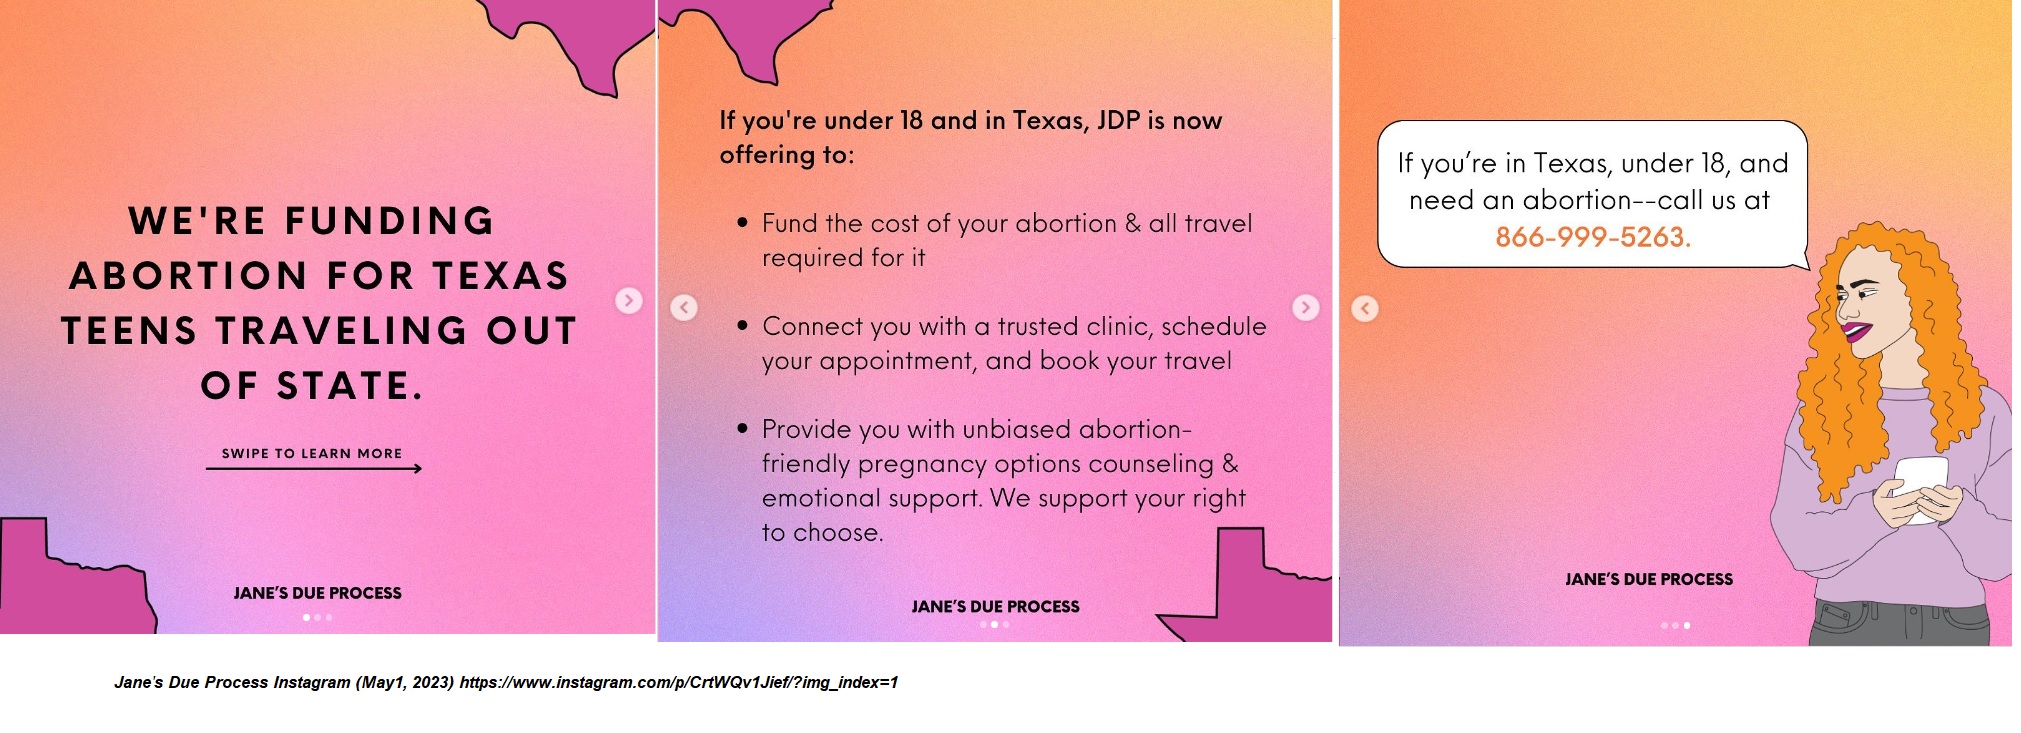 Jane's Due Process offers travel assistance to teens for abortion (Image: Instagram)